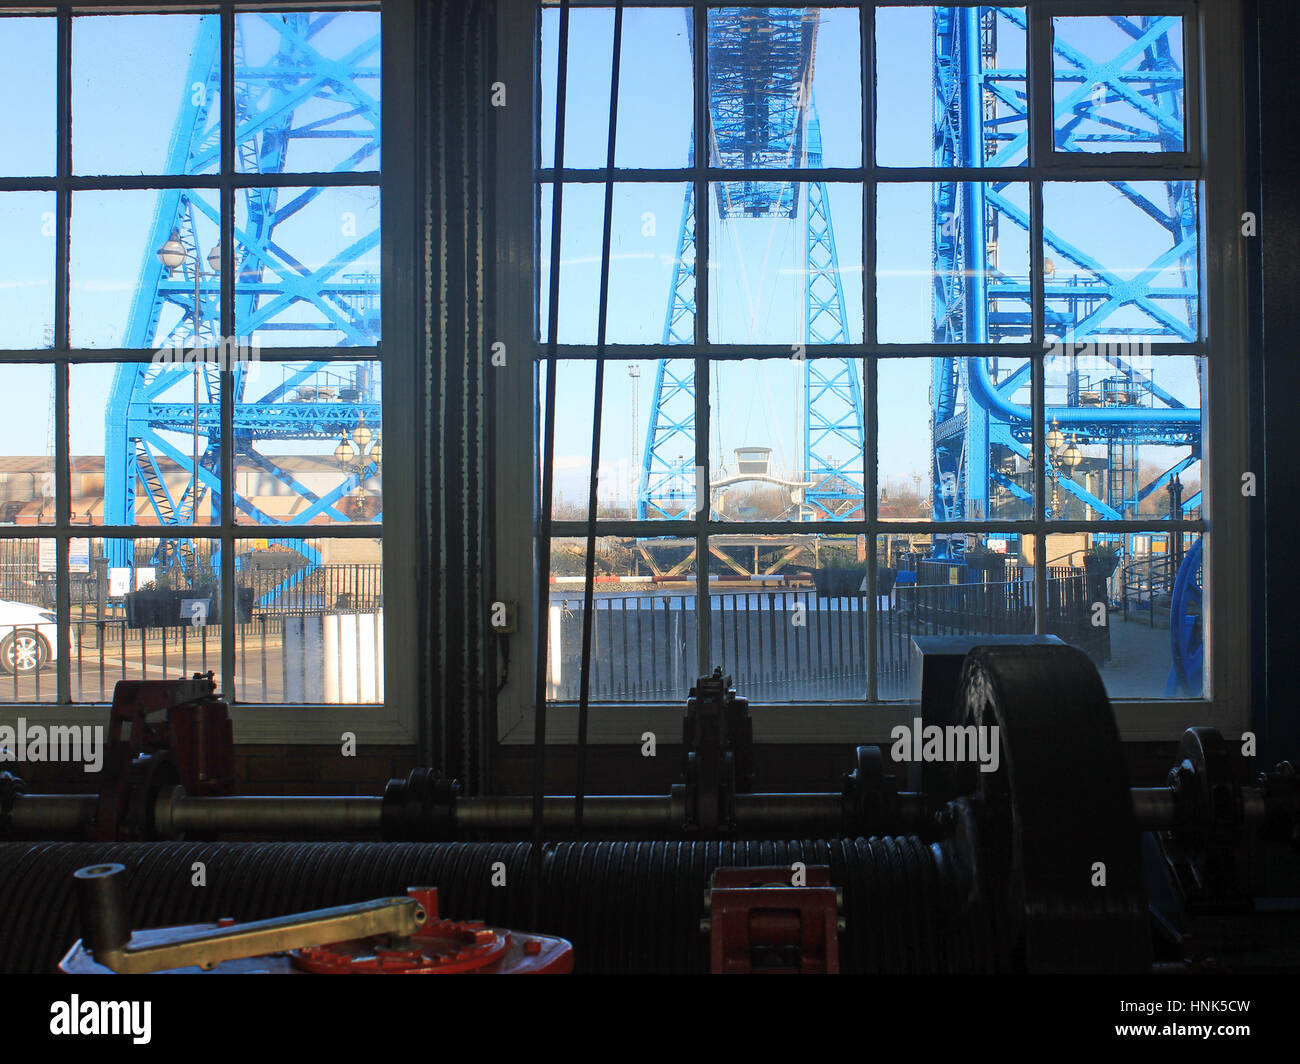 The transporter bridge over the Tees in Middlesbrough seen from the winding house from which the movement of the gondola is driven by electric motors. Stock Photo